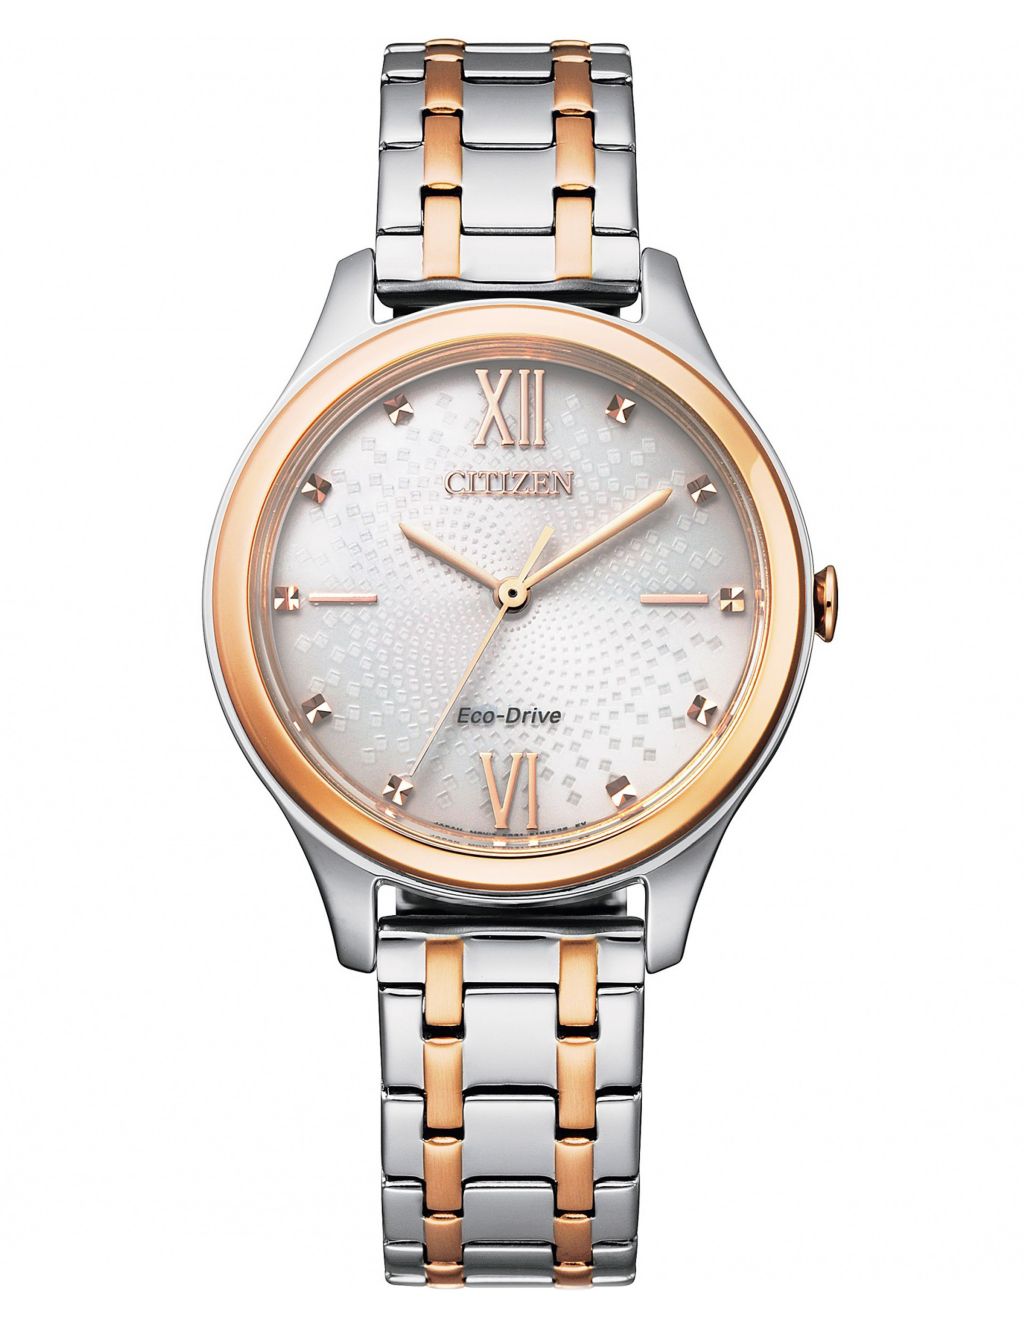 Citizen Eco-Drive Stainless Steel Watch image 1